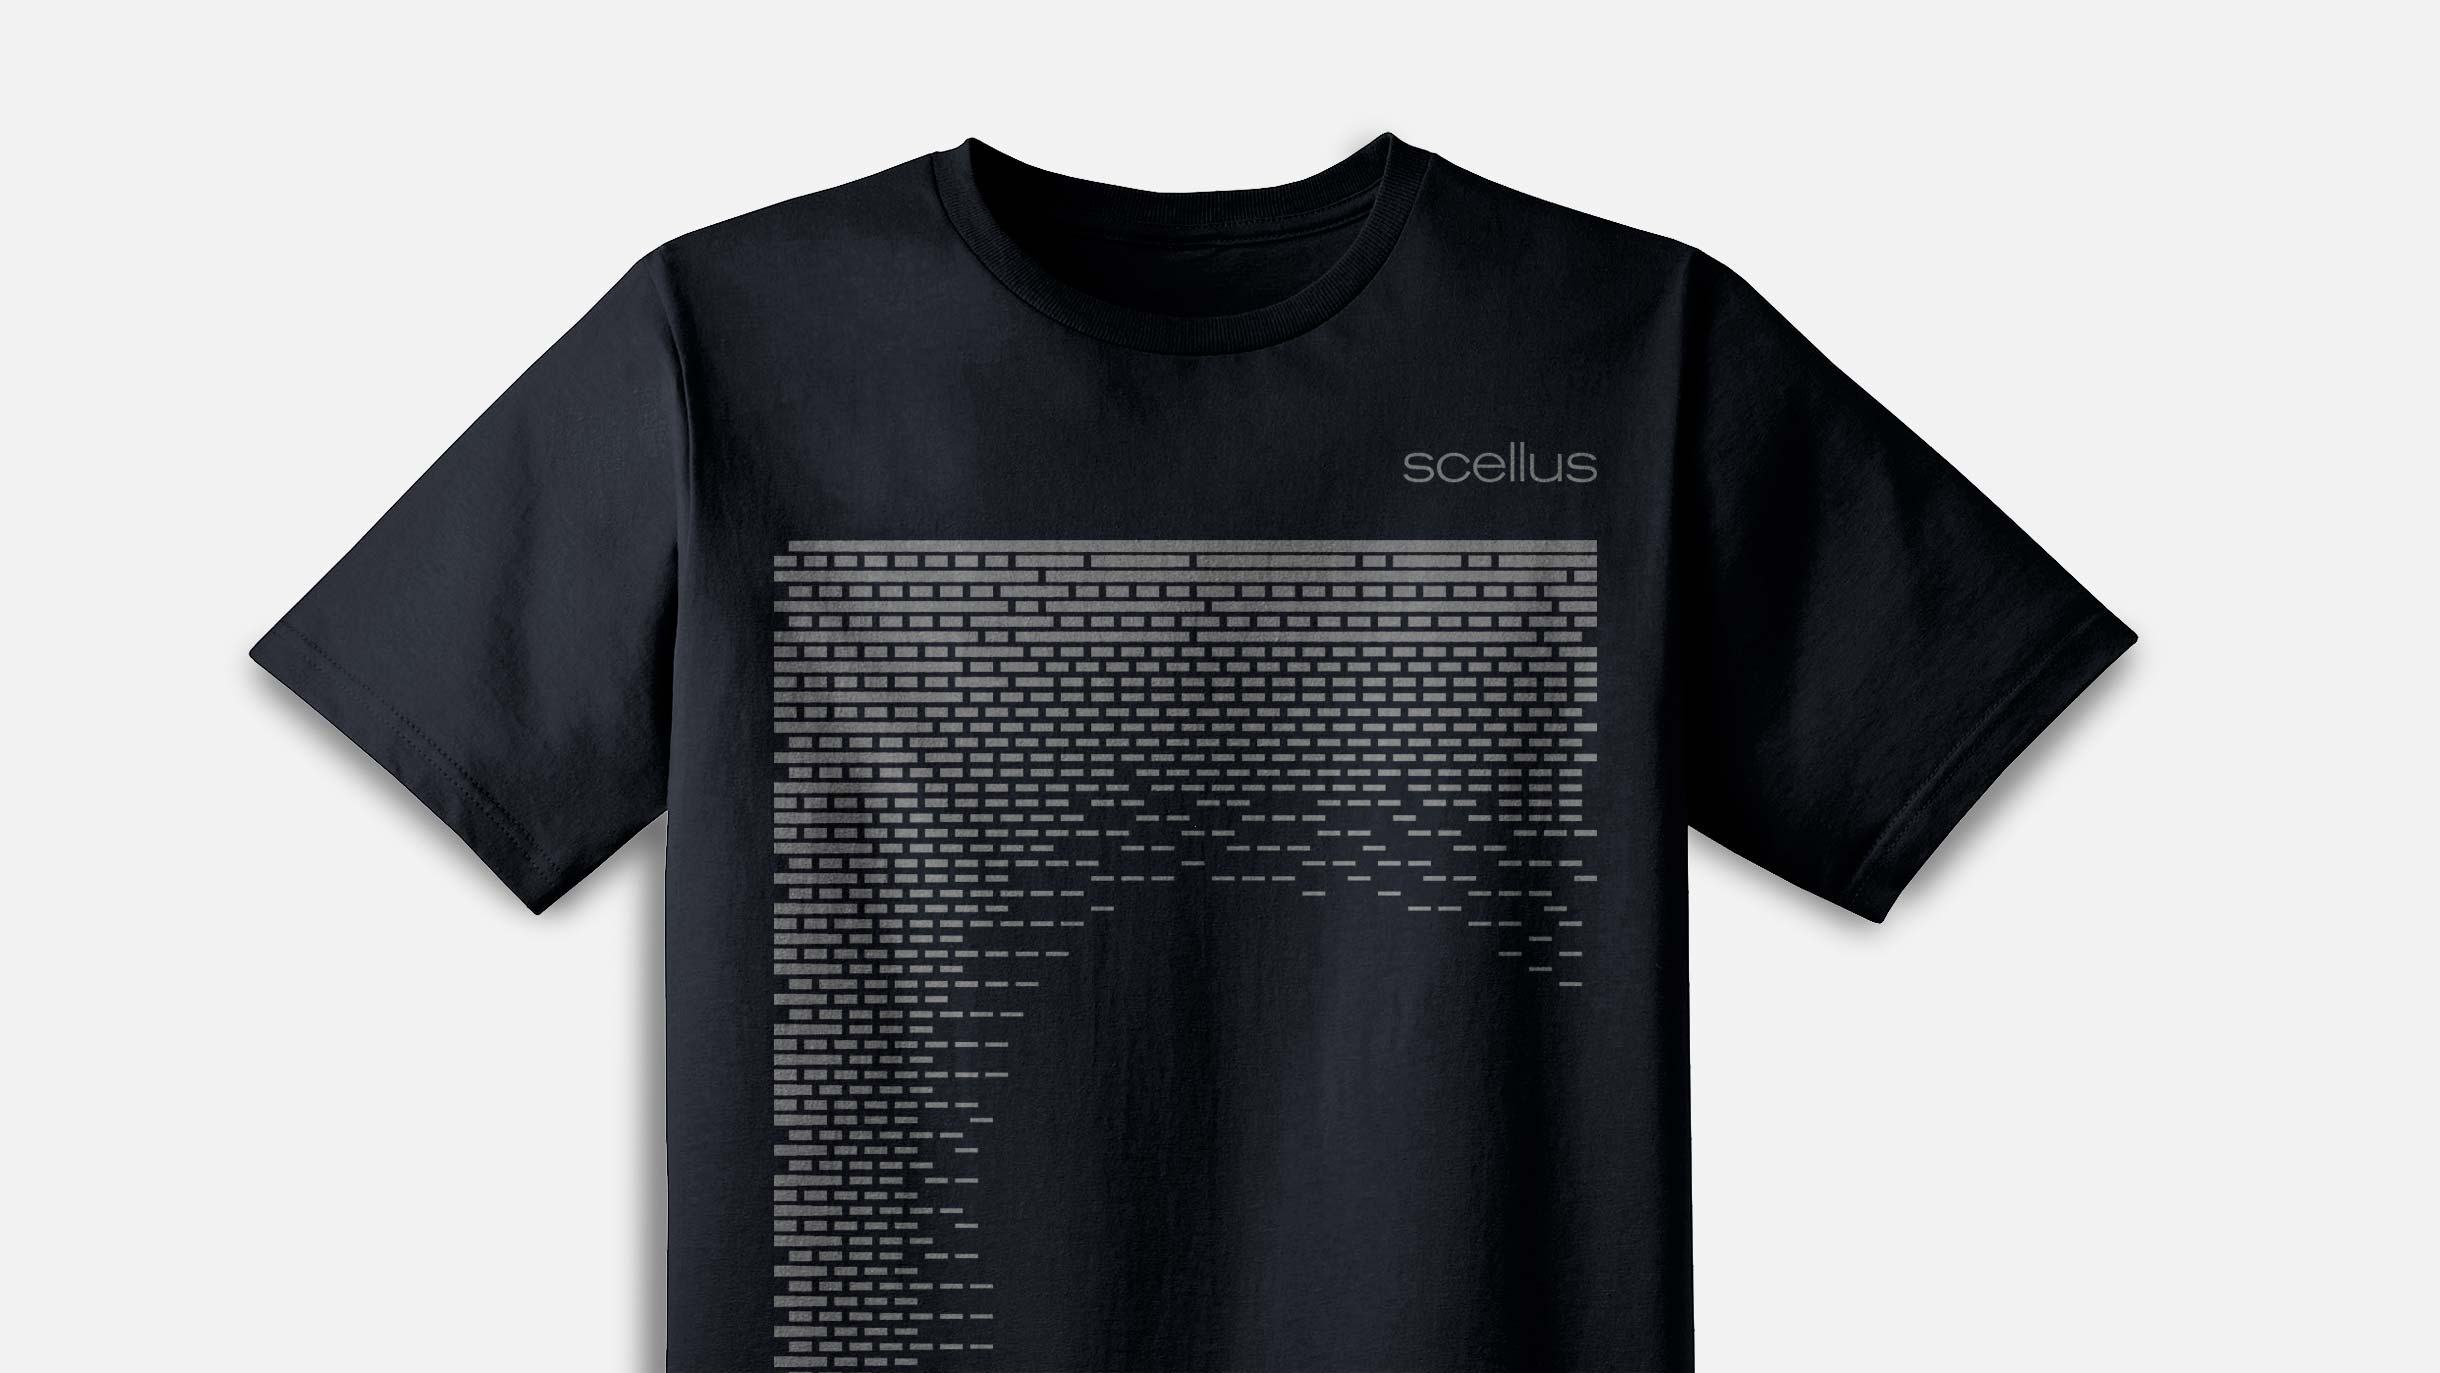 T-Shirt for Scellus by Elephero